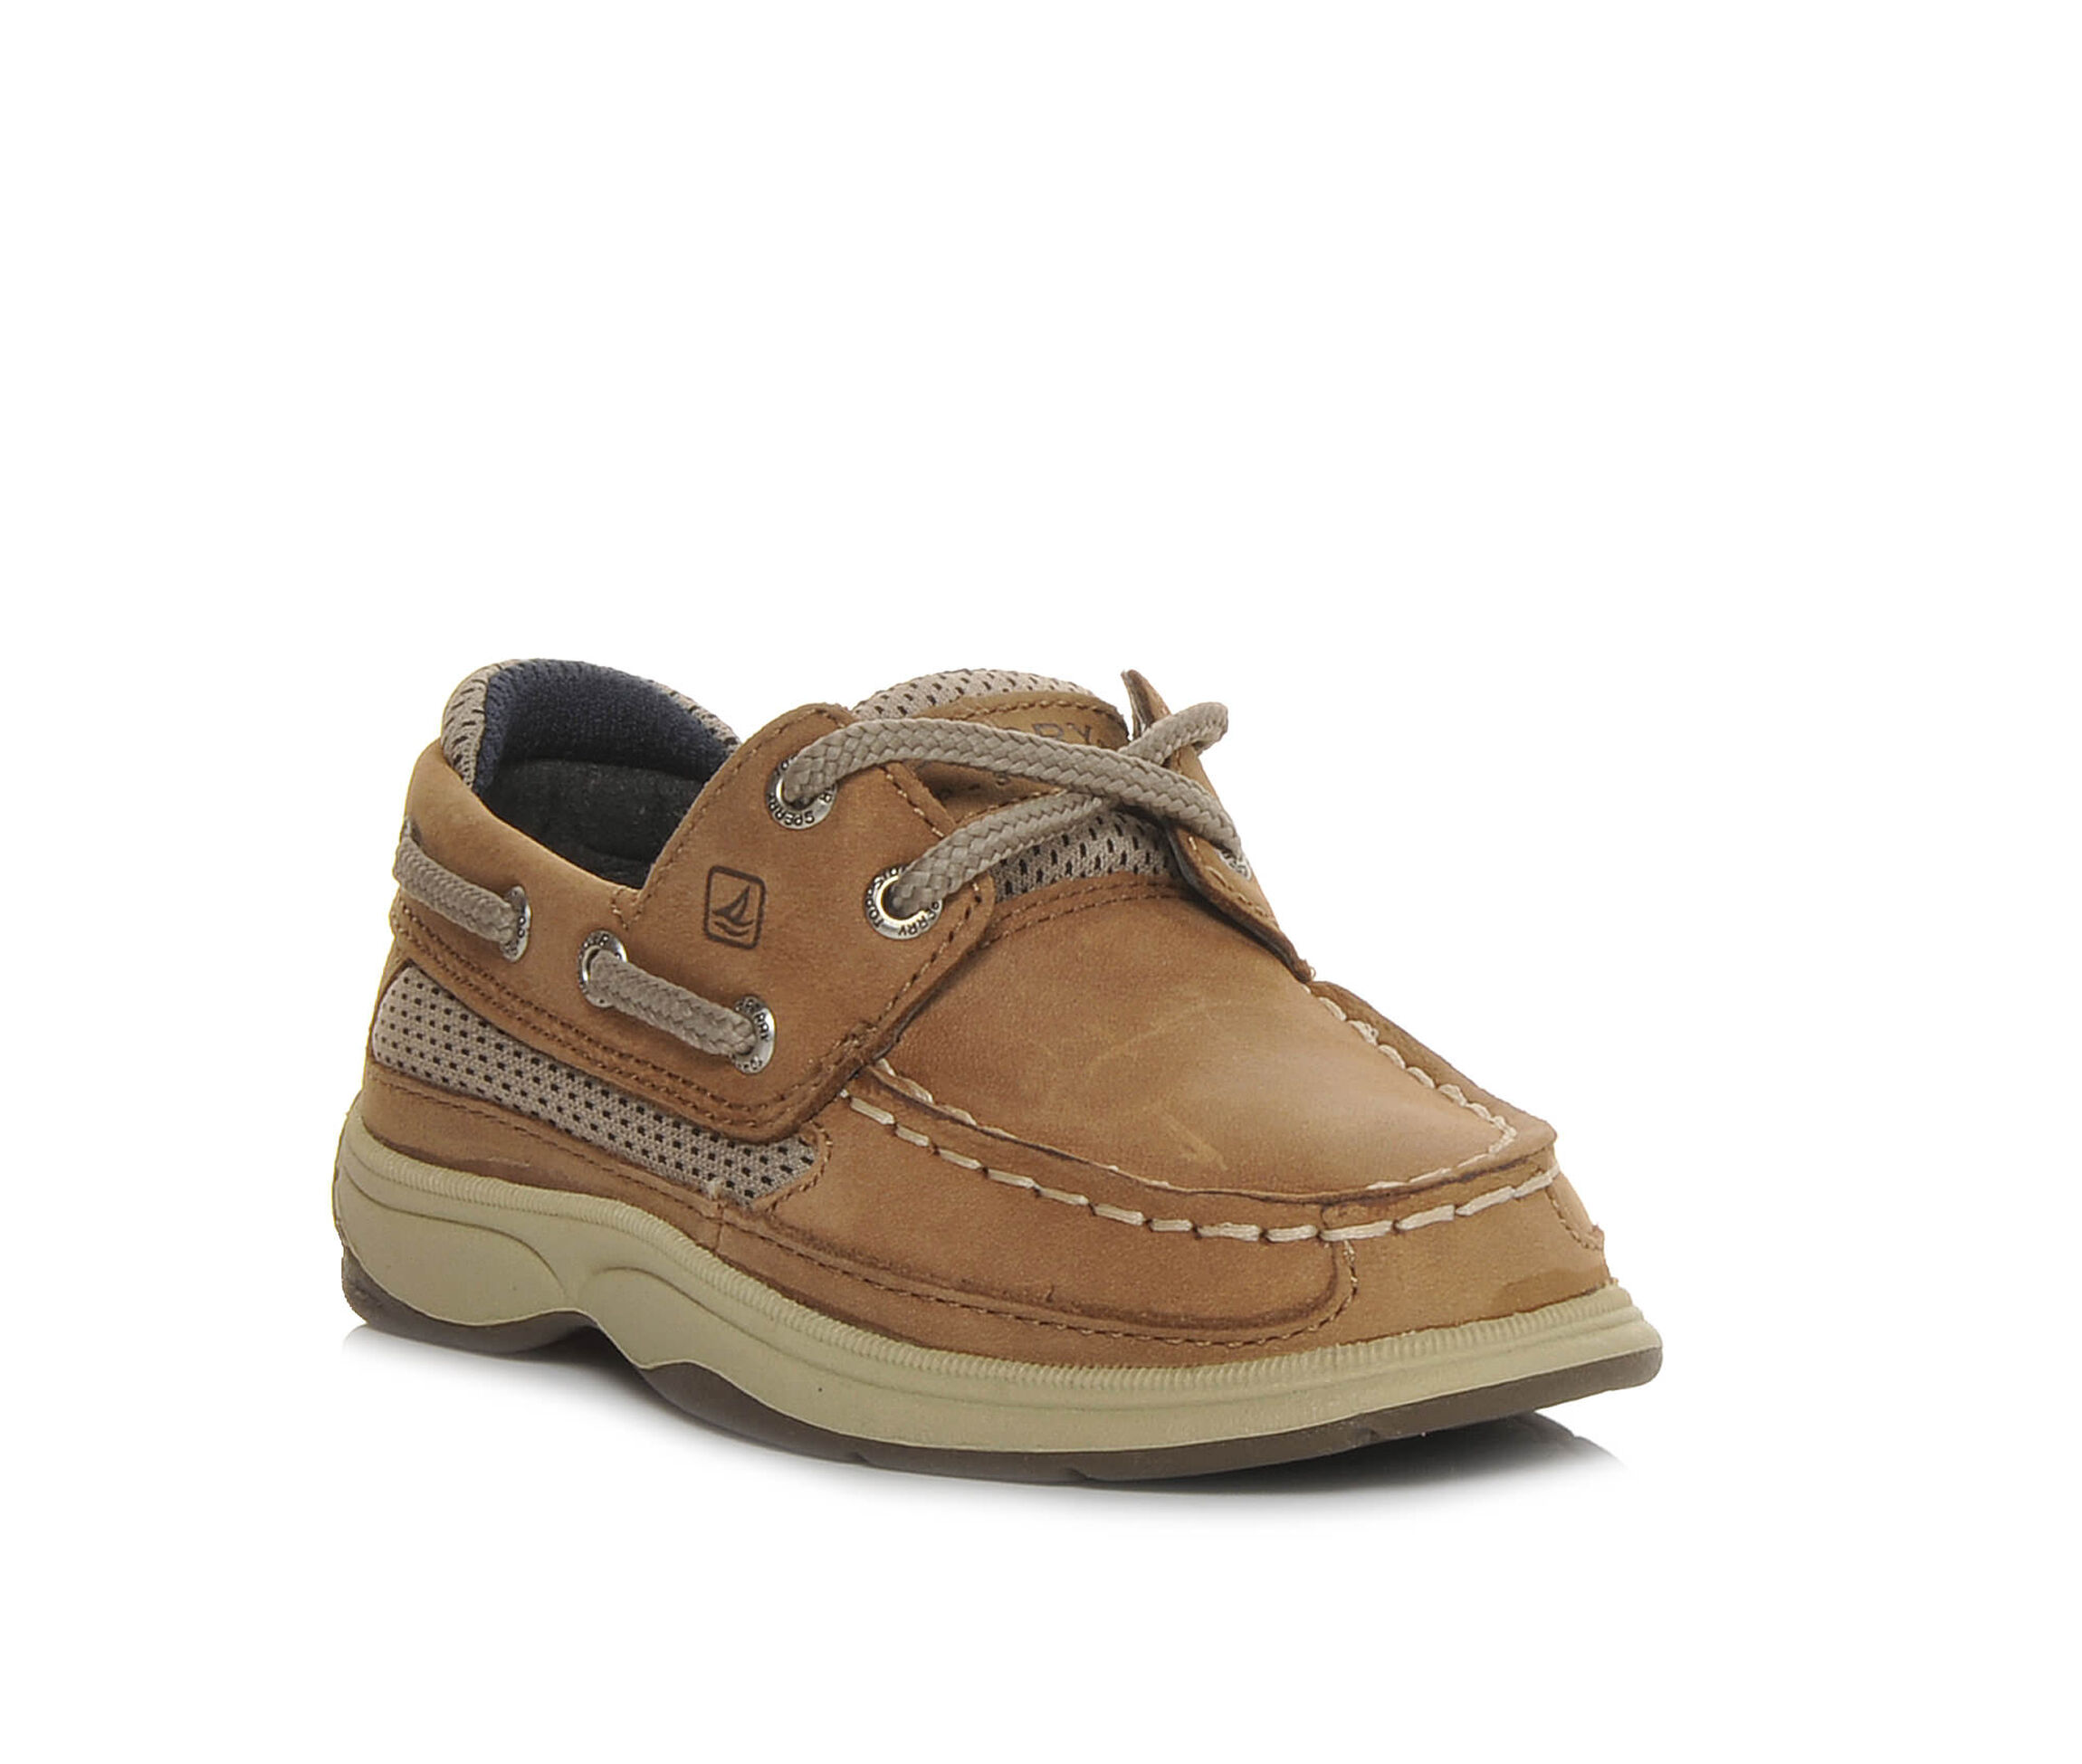 Sperry Boat Shoes and Duck Boots | Shoe Carnival